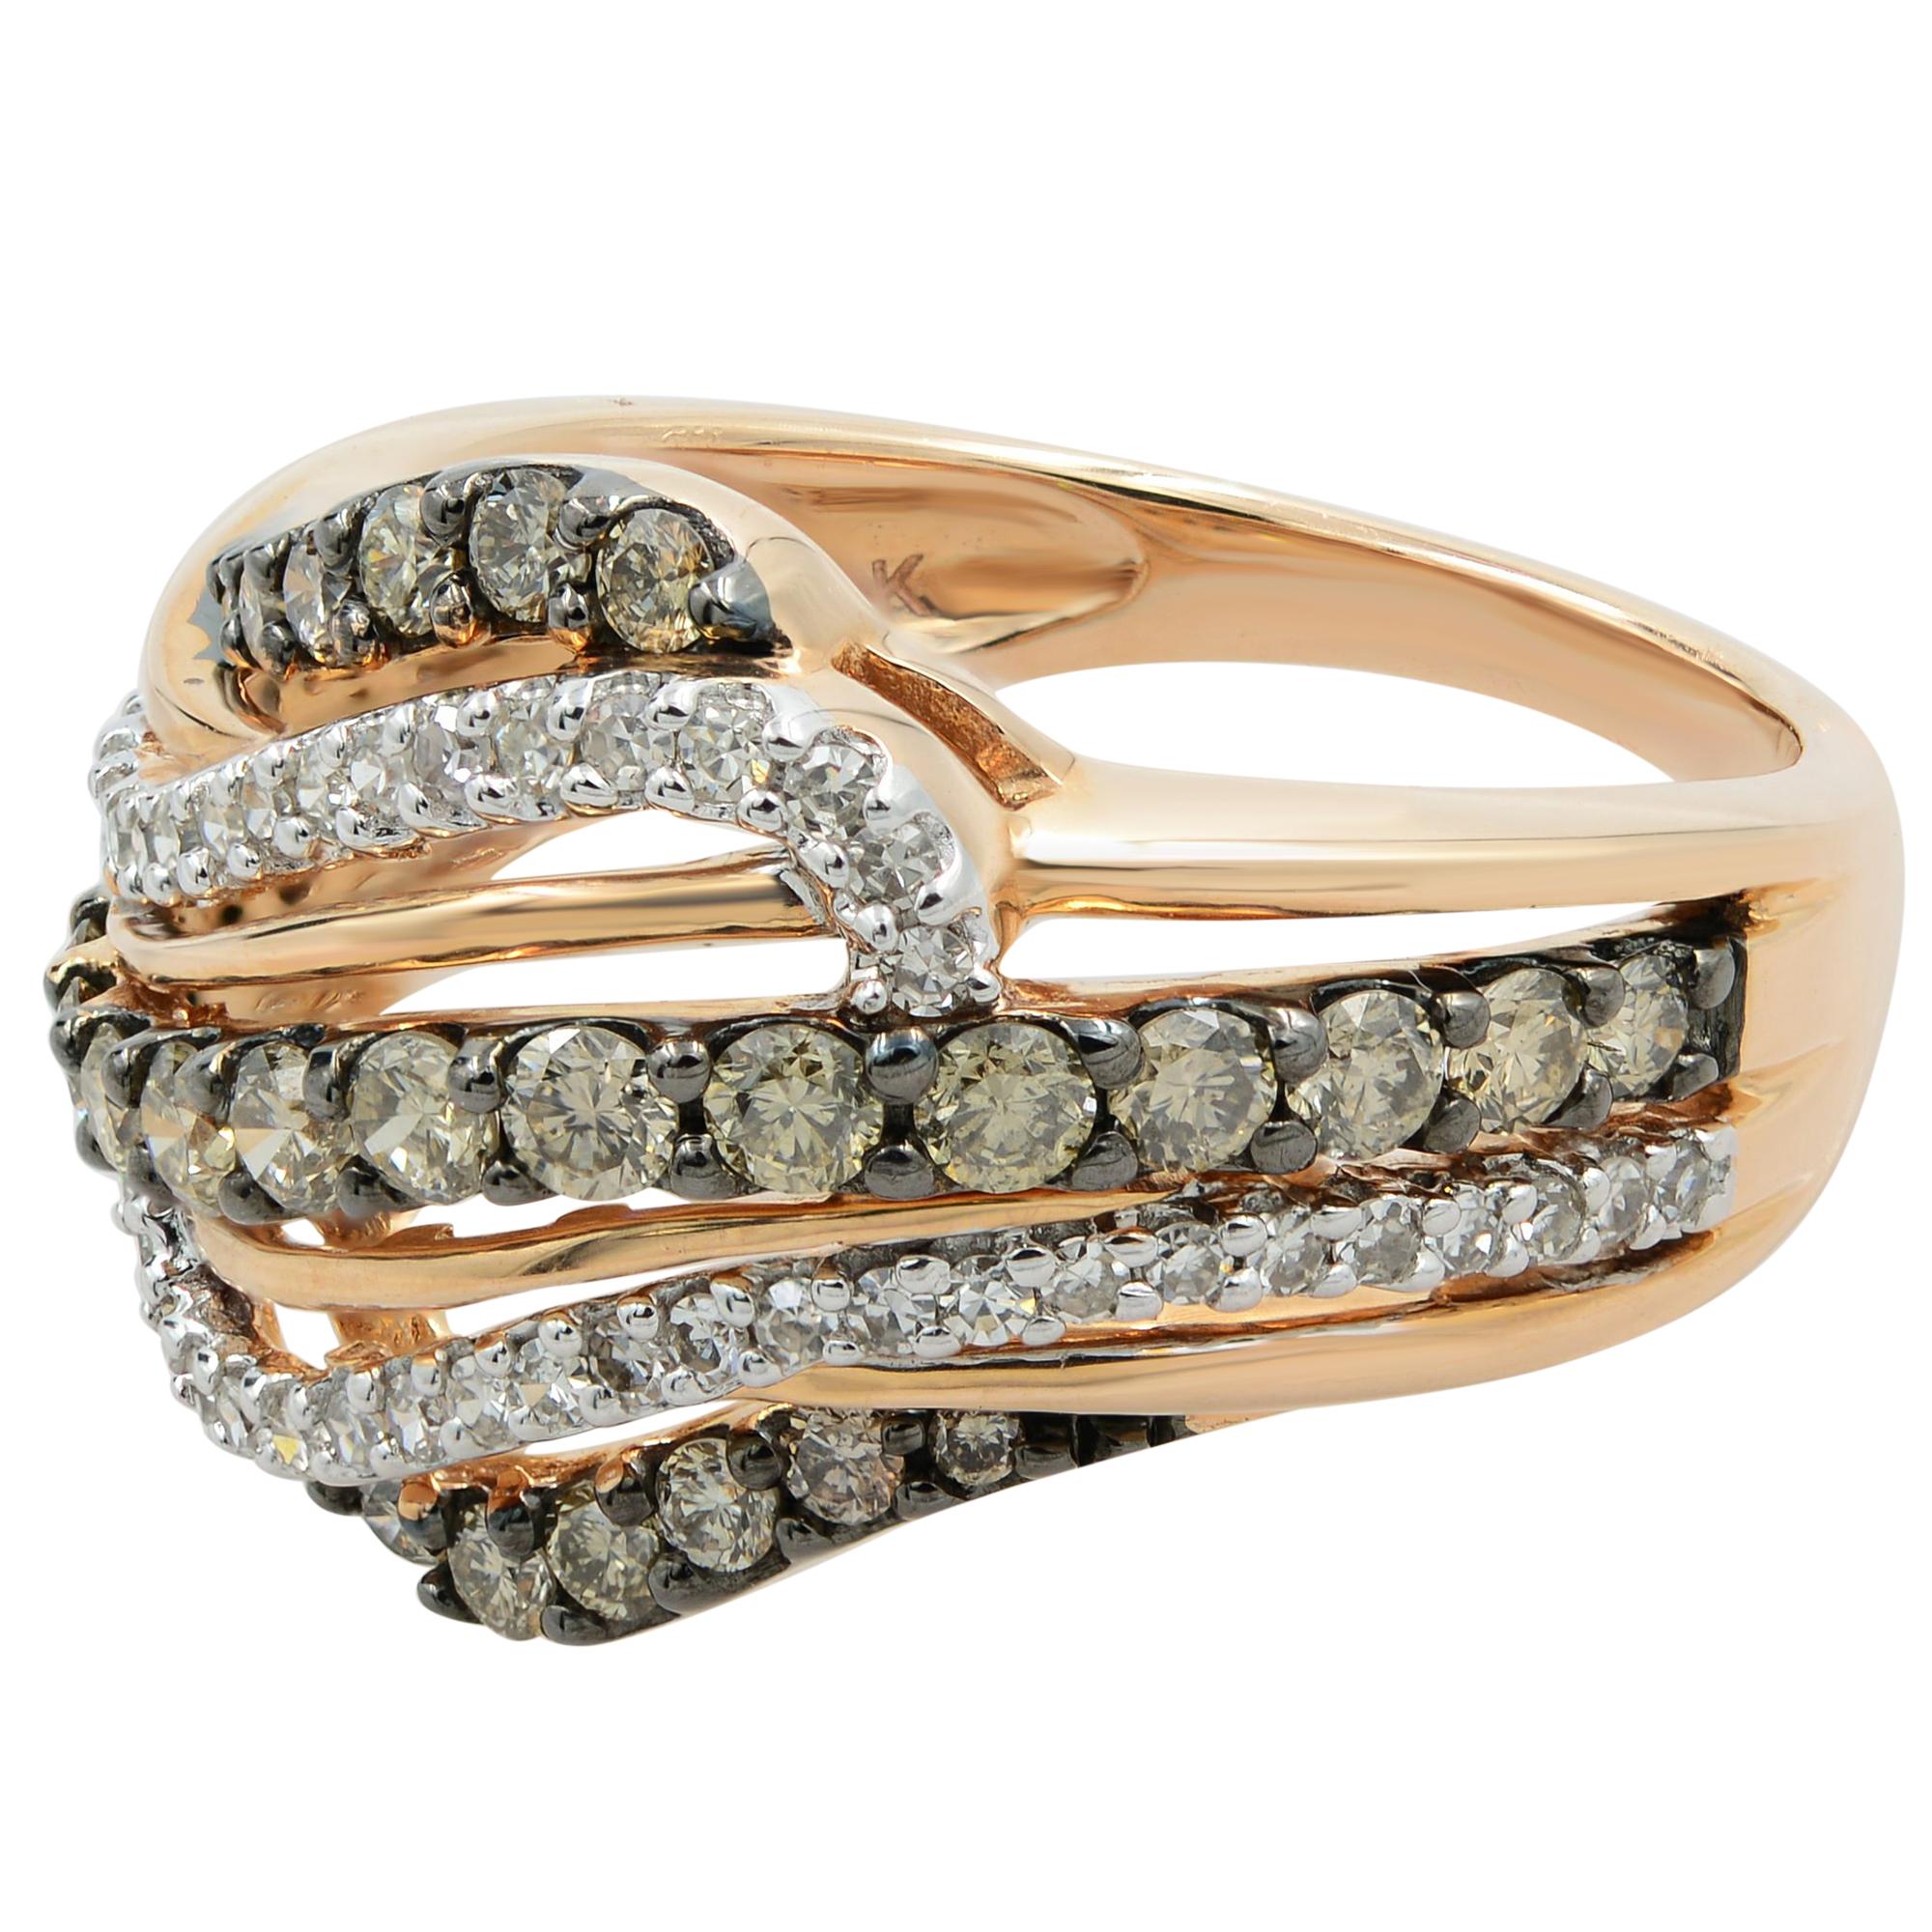 Champagne Diamonds Rose Gold Cross Over Ring 1.00 cts 

10k rose gold pave ring with pavé champagne diamonds, 1.00 tcw
Wrap her finger in the colorful elegance of this diamond crossover ring. Expertly crafted in 10K rose gold, this ring marries